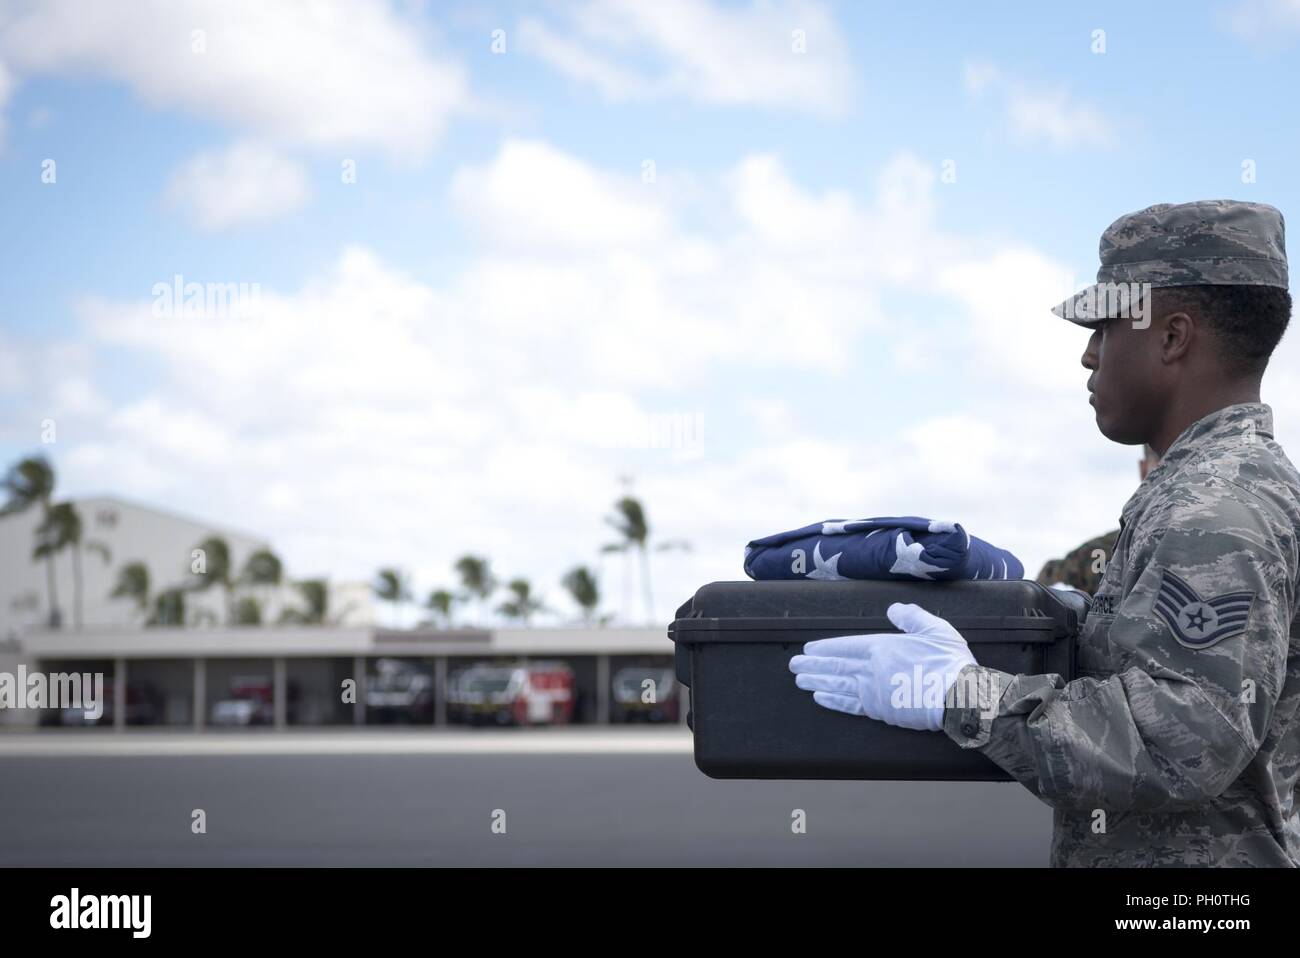 U.S. Air Force Staff Sgt. Sedric Franklin, an analyst with the Defense POW/MIA Accounting Agency (DPAA), conducts an honorable carry at Joint Base Pearl Harbor-Hickam, Hawaii, June 21, 2018. DPAA conducts global search, recovery and laboratory operations to provide the fullest possible accounting for our missing personnel to their families and the nation. Stock Photo